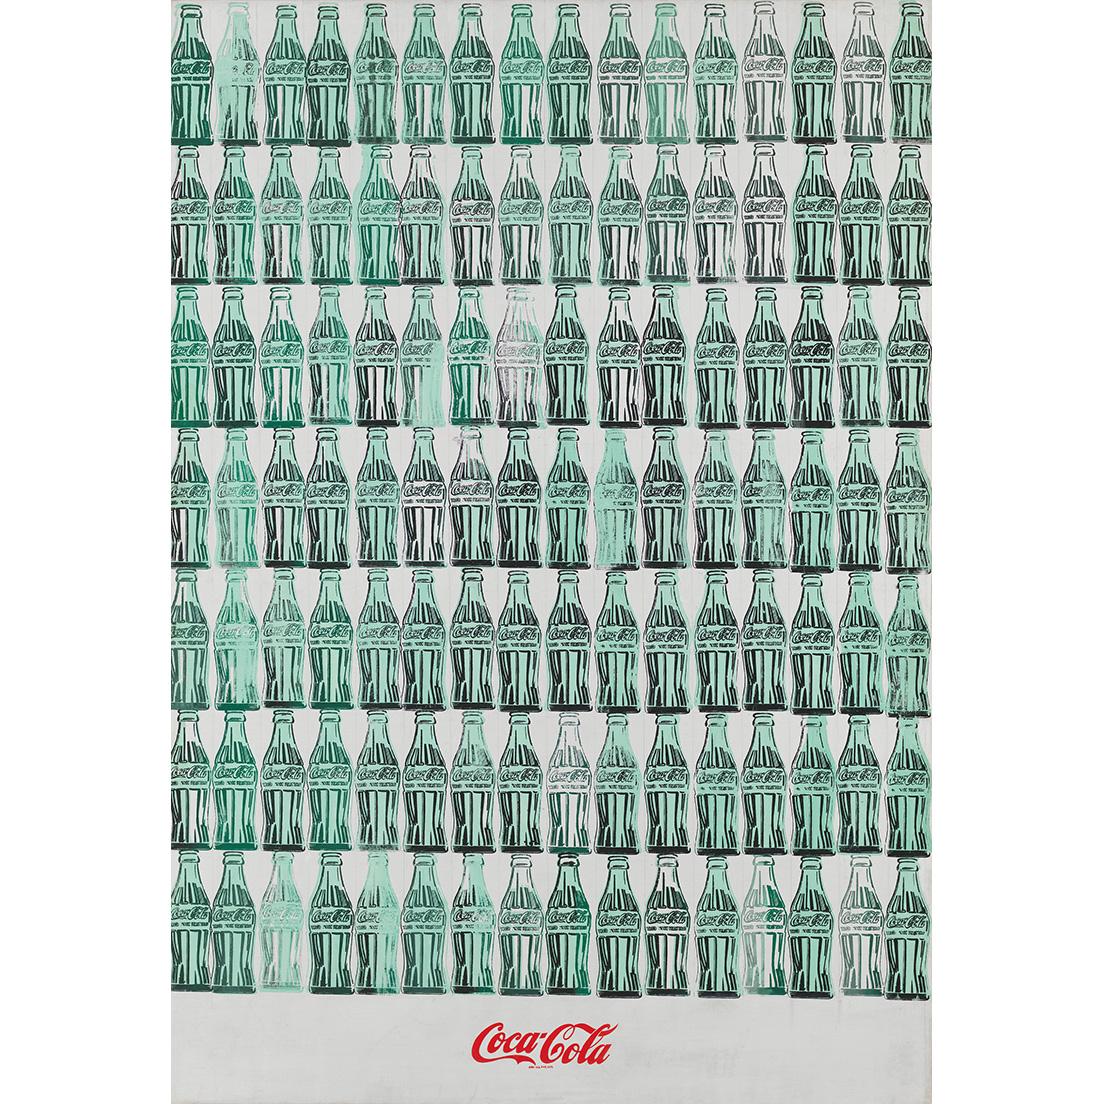 《Green coca-cola bottles》（1962年） Whitney Museum of American Art, New York; purchase with funds from the Friends of the Whitney Museum of American Art 68.25.　© 2020 The Andy Warhol Foundation for the Visual Arts, Inc. / Licensed by DACS, London